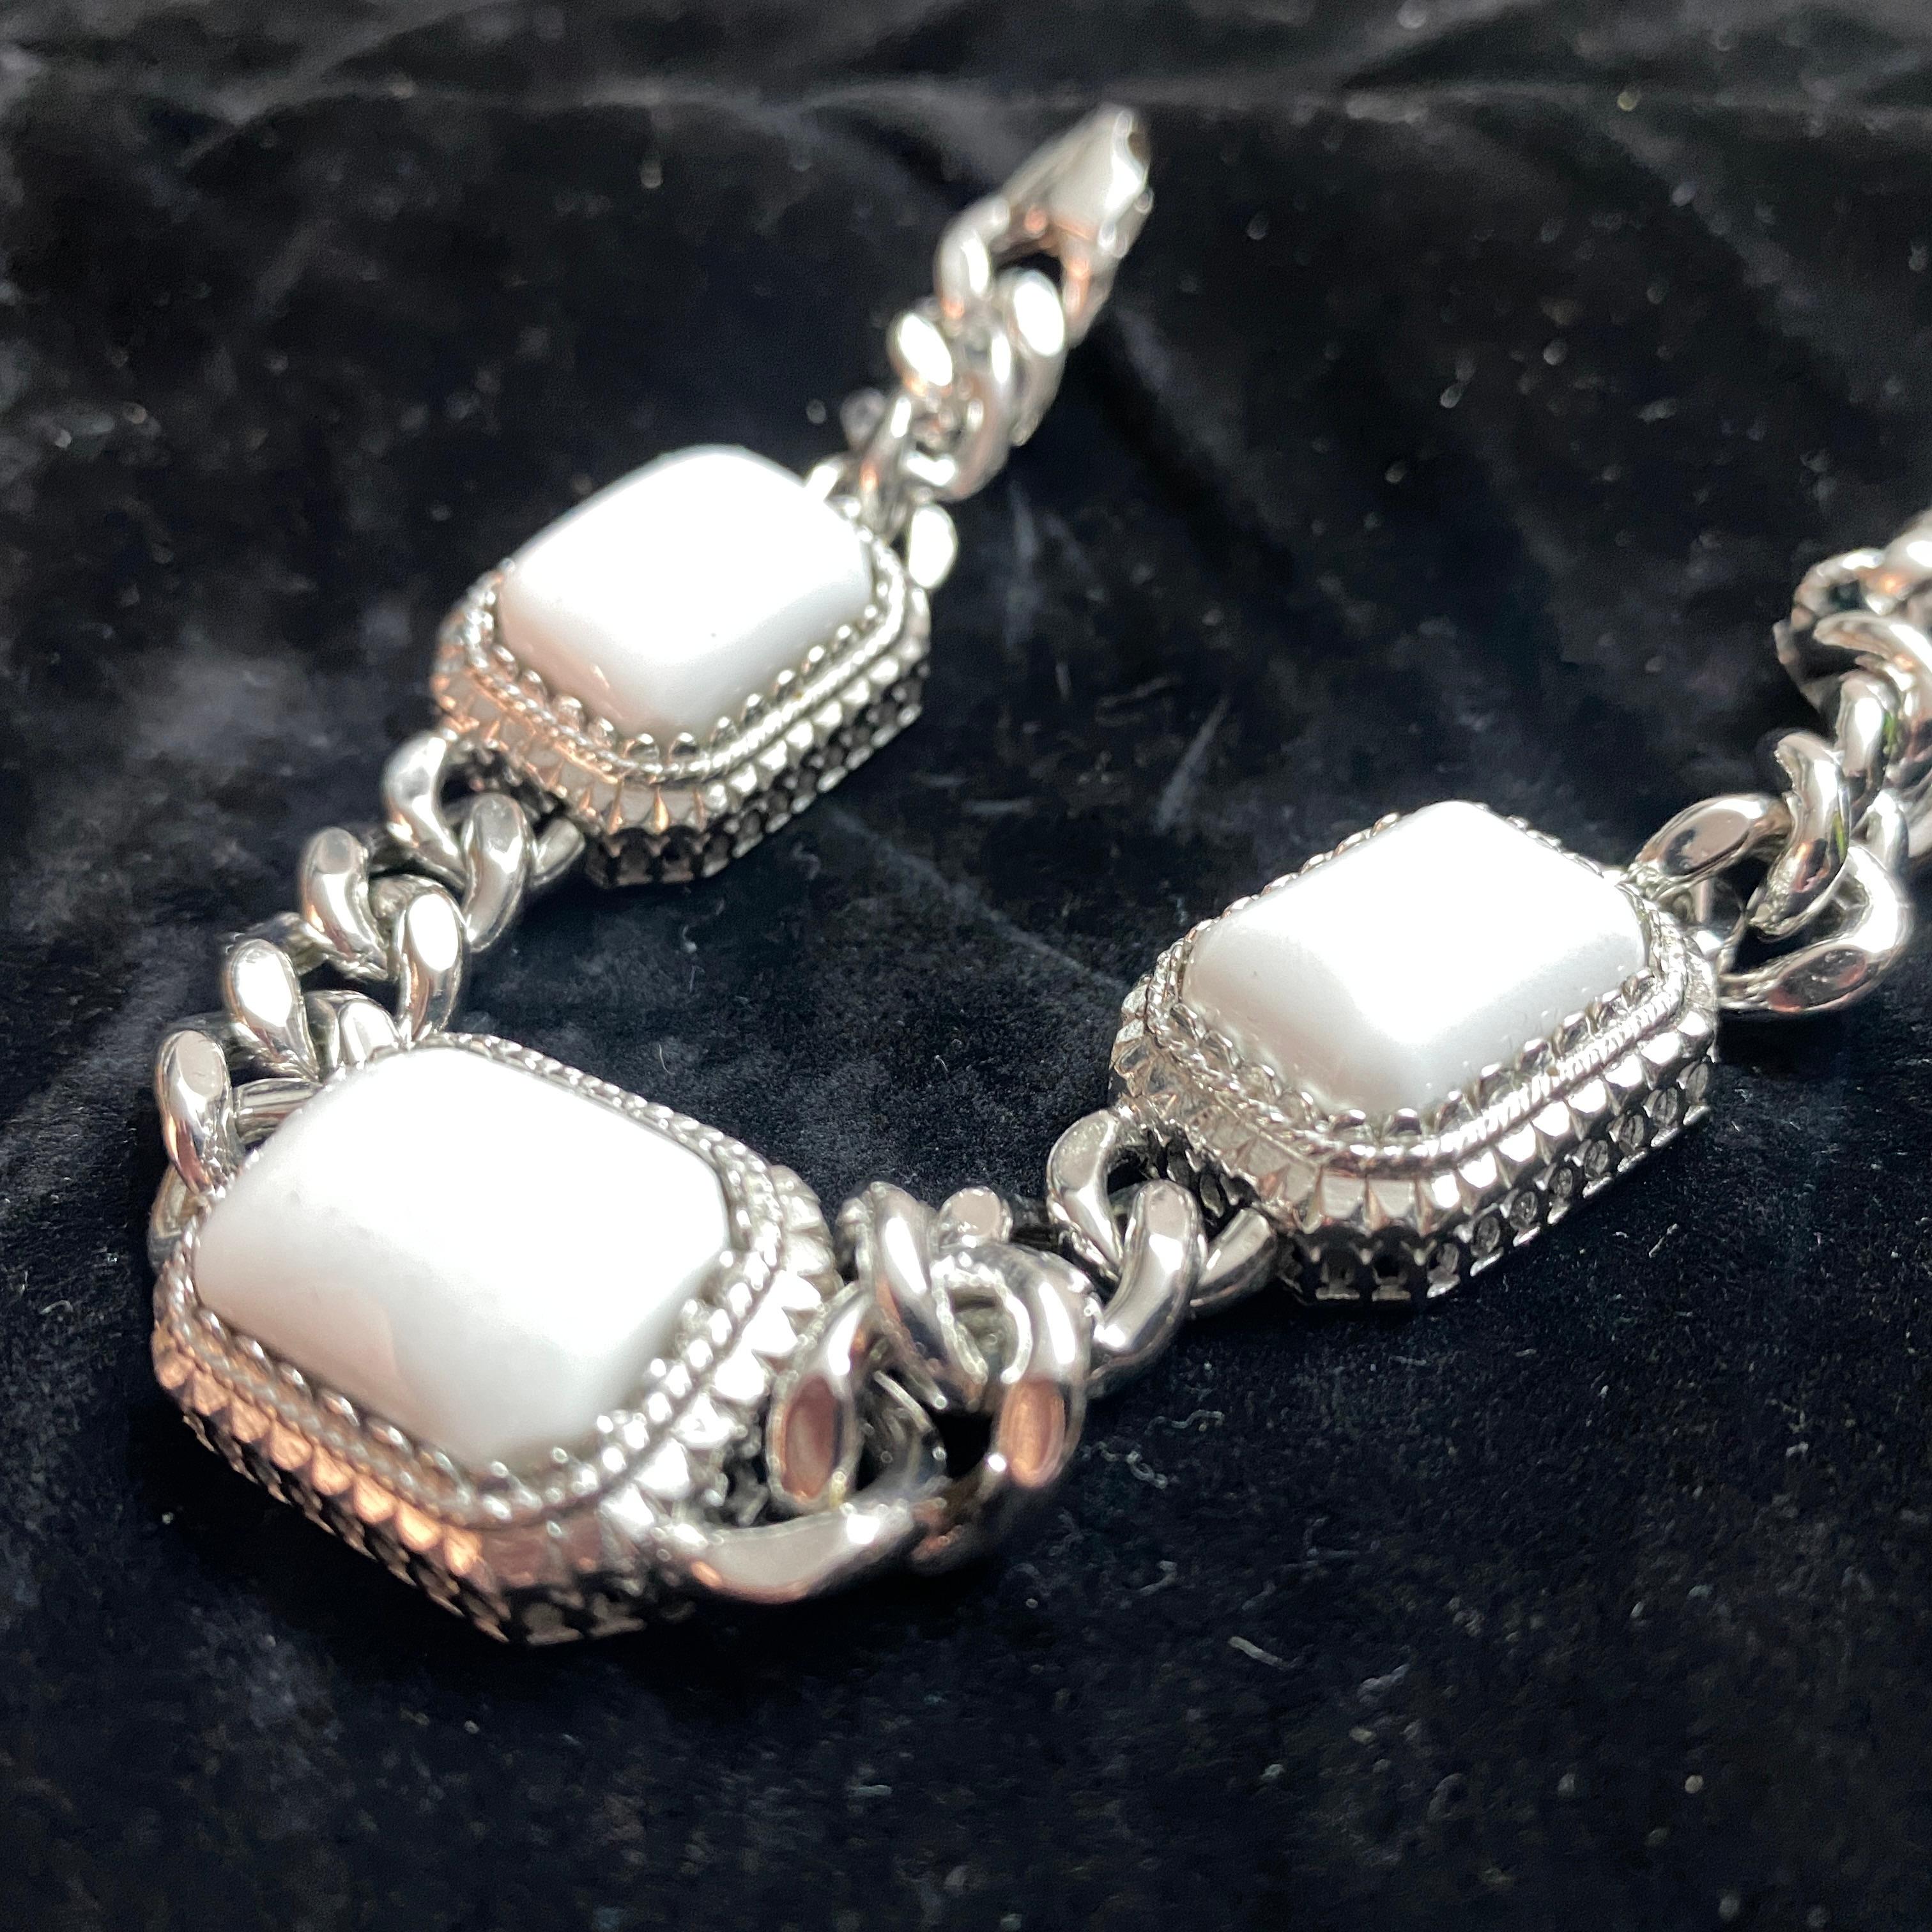 Cabochon 1990s Sterling Silver and White Agate Retro Chain Bracelet by Anomis